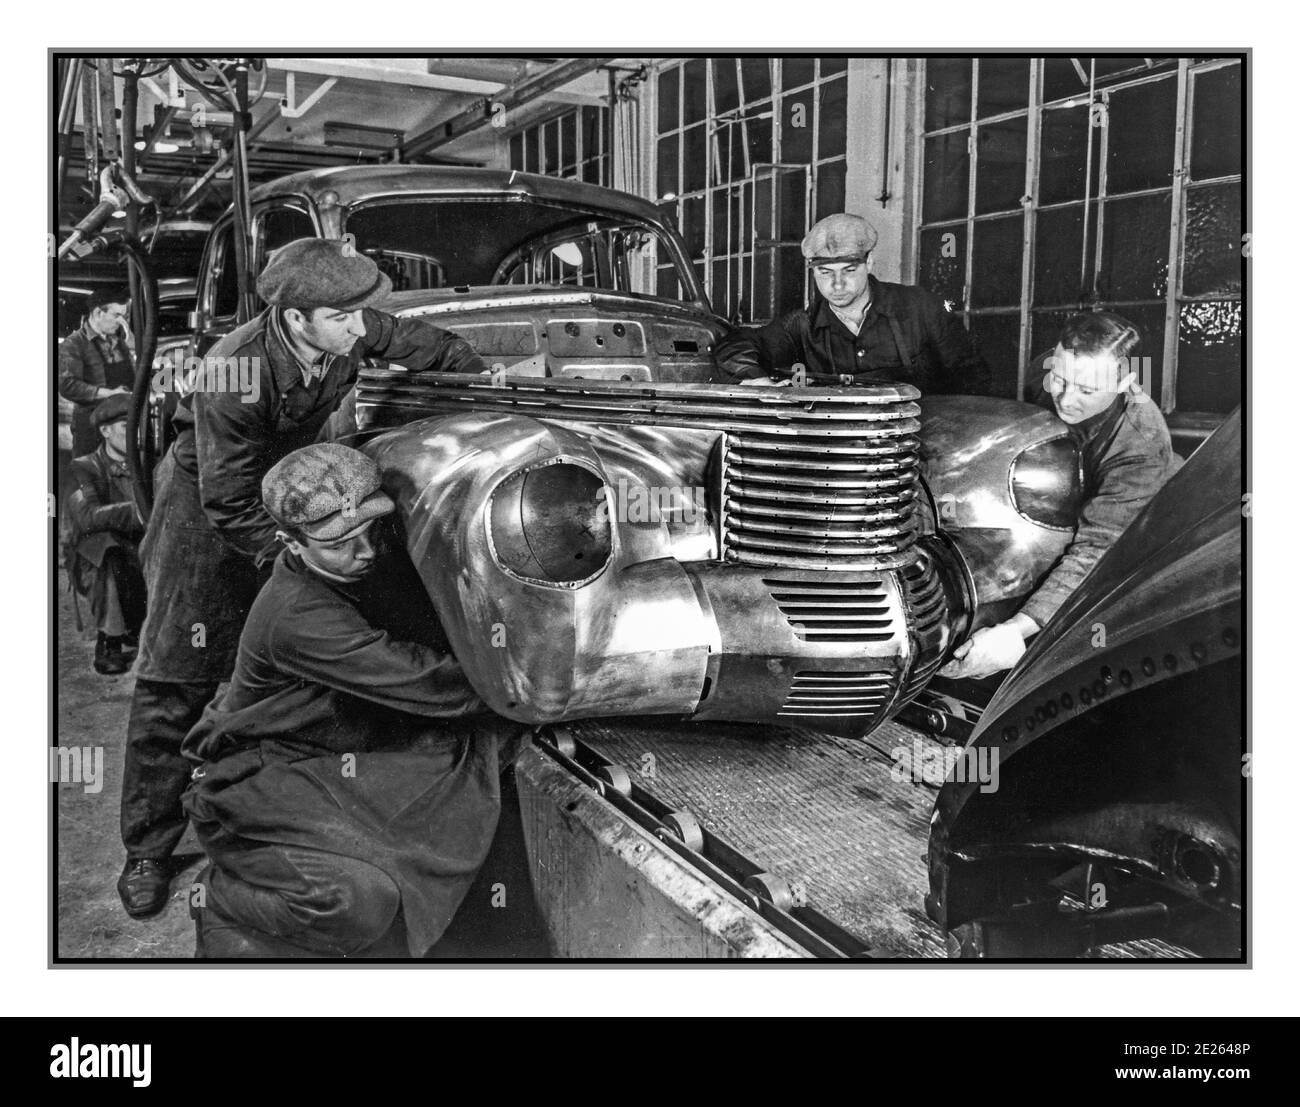 GERMAN CAR ASSEMBLY 1938 Opel Capitan motorcar steel body being assembled in the Opel Car Plant assembly factory production line Germany Opel Kapitän sedan.The Kapitän was the last new Opel model to appear before the outbreak of the Second World War, developed during 1938 and launched in the spring of 1939 at the Geneva motor show. Production began in November 1938 Stock Photo